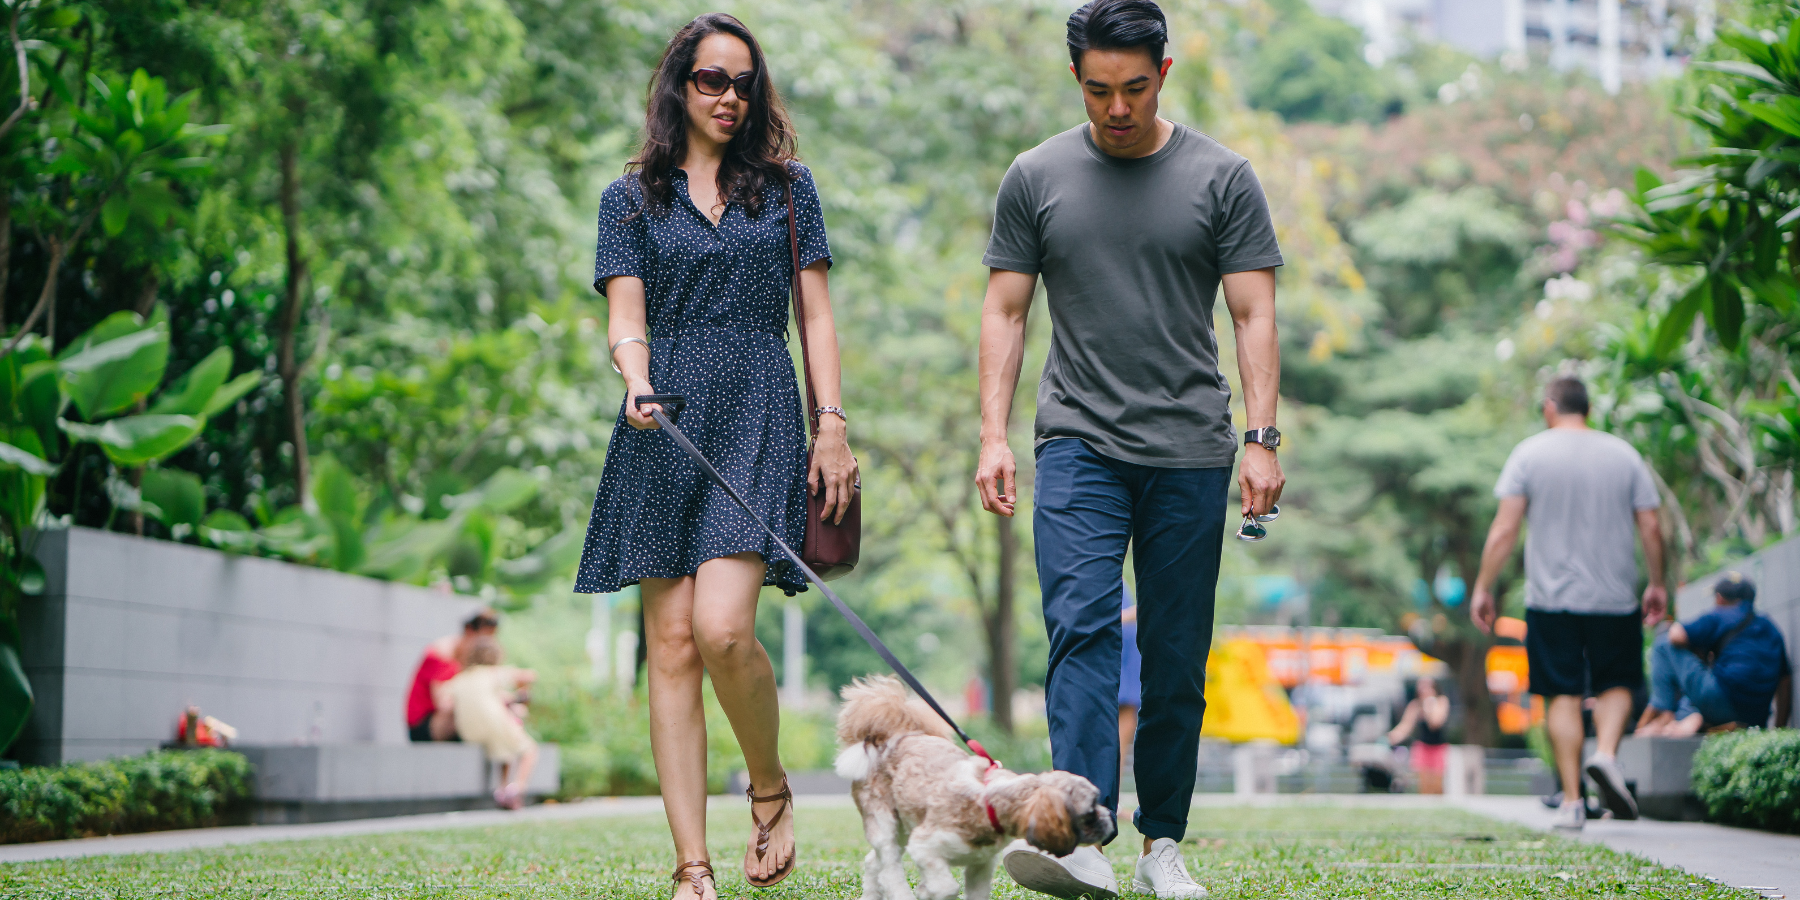 Couple Walk in Park with Dog